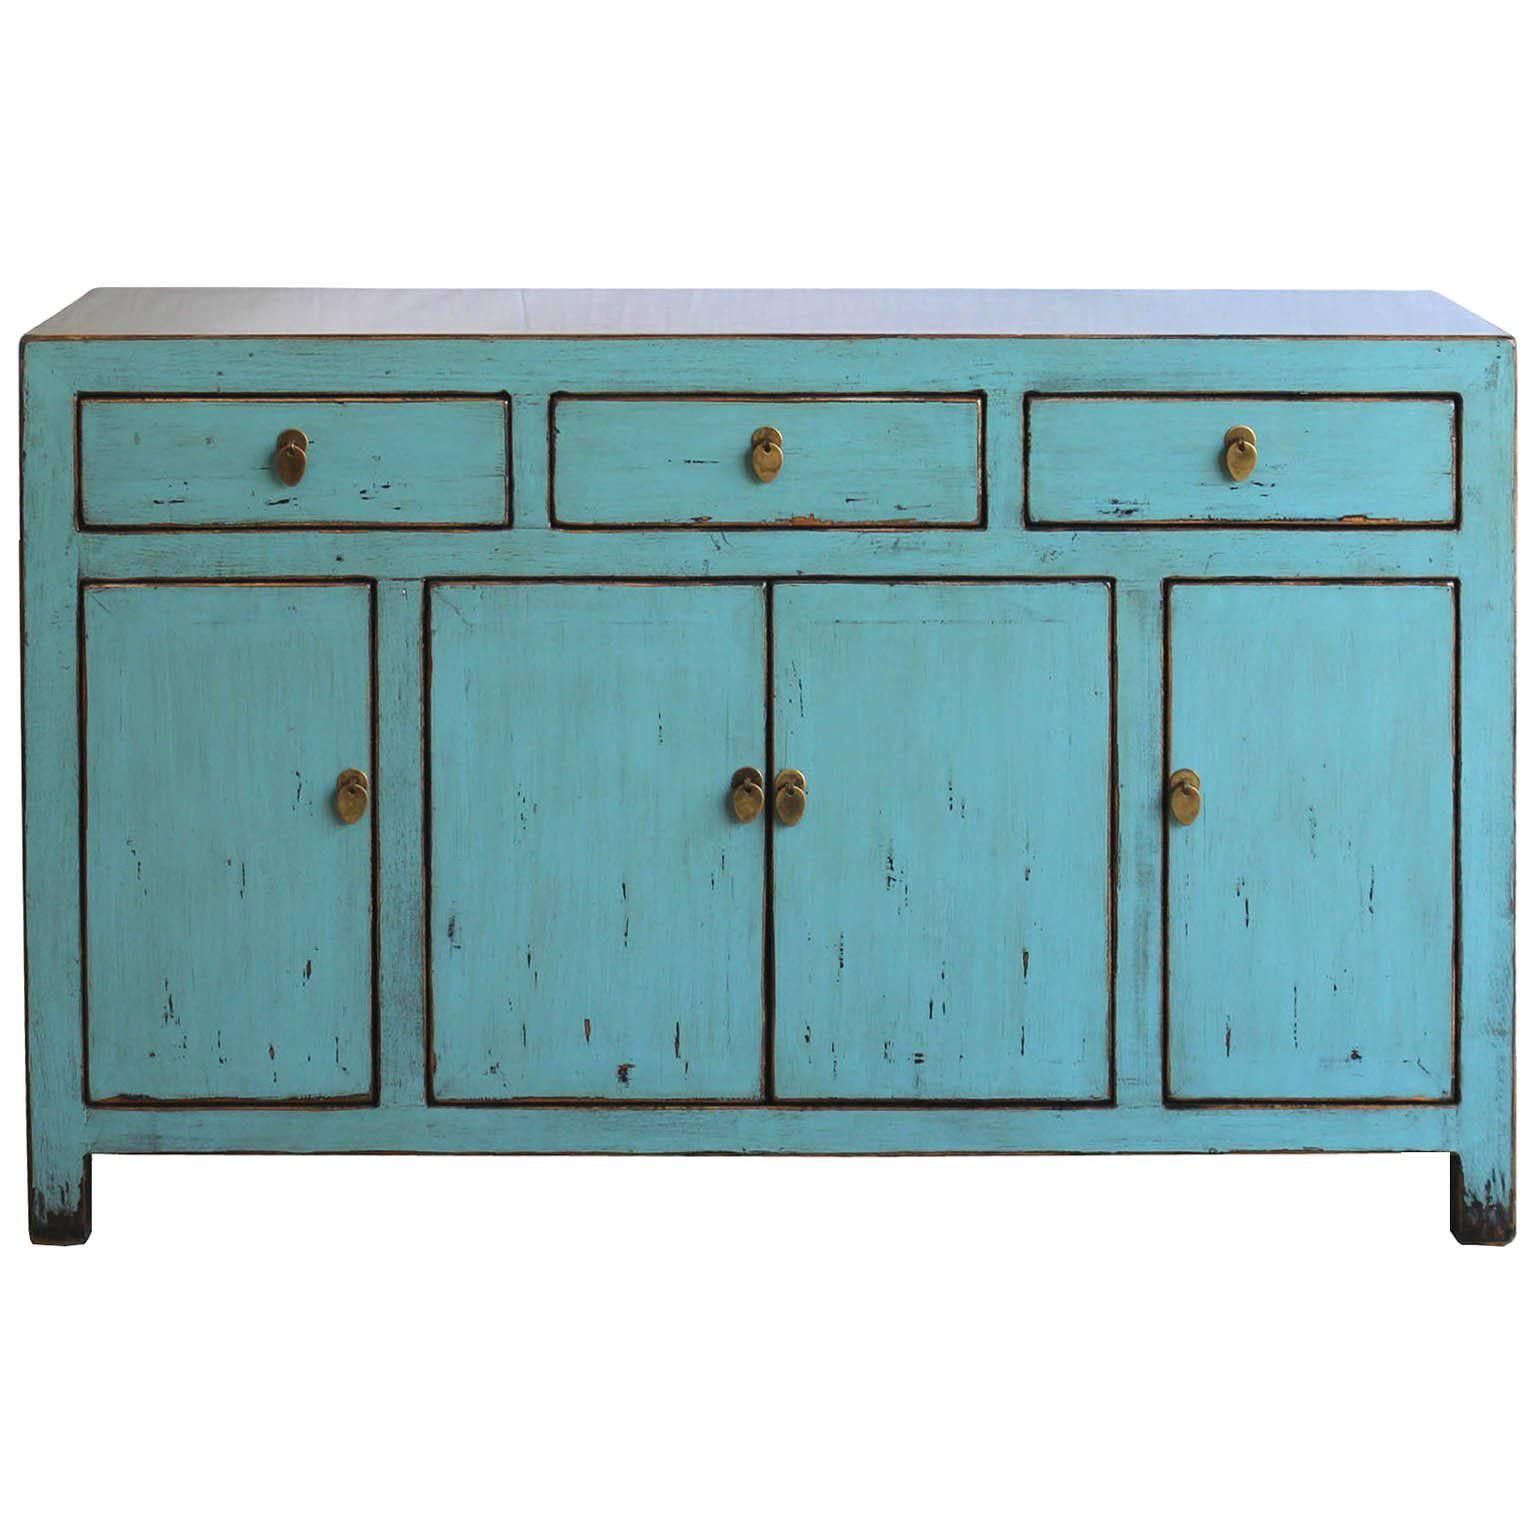 Contemporary three-drawer light blue lacquer sideboard with exposed wood edges. Use as a media chest or as a sideboard in the dining room.